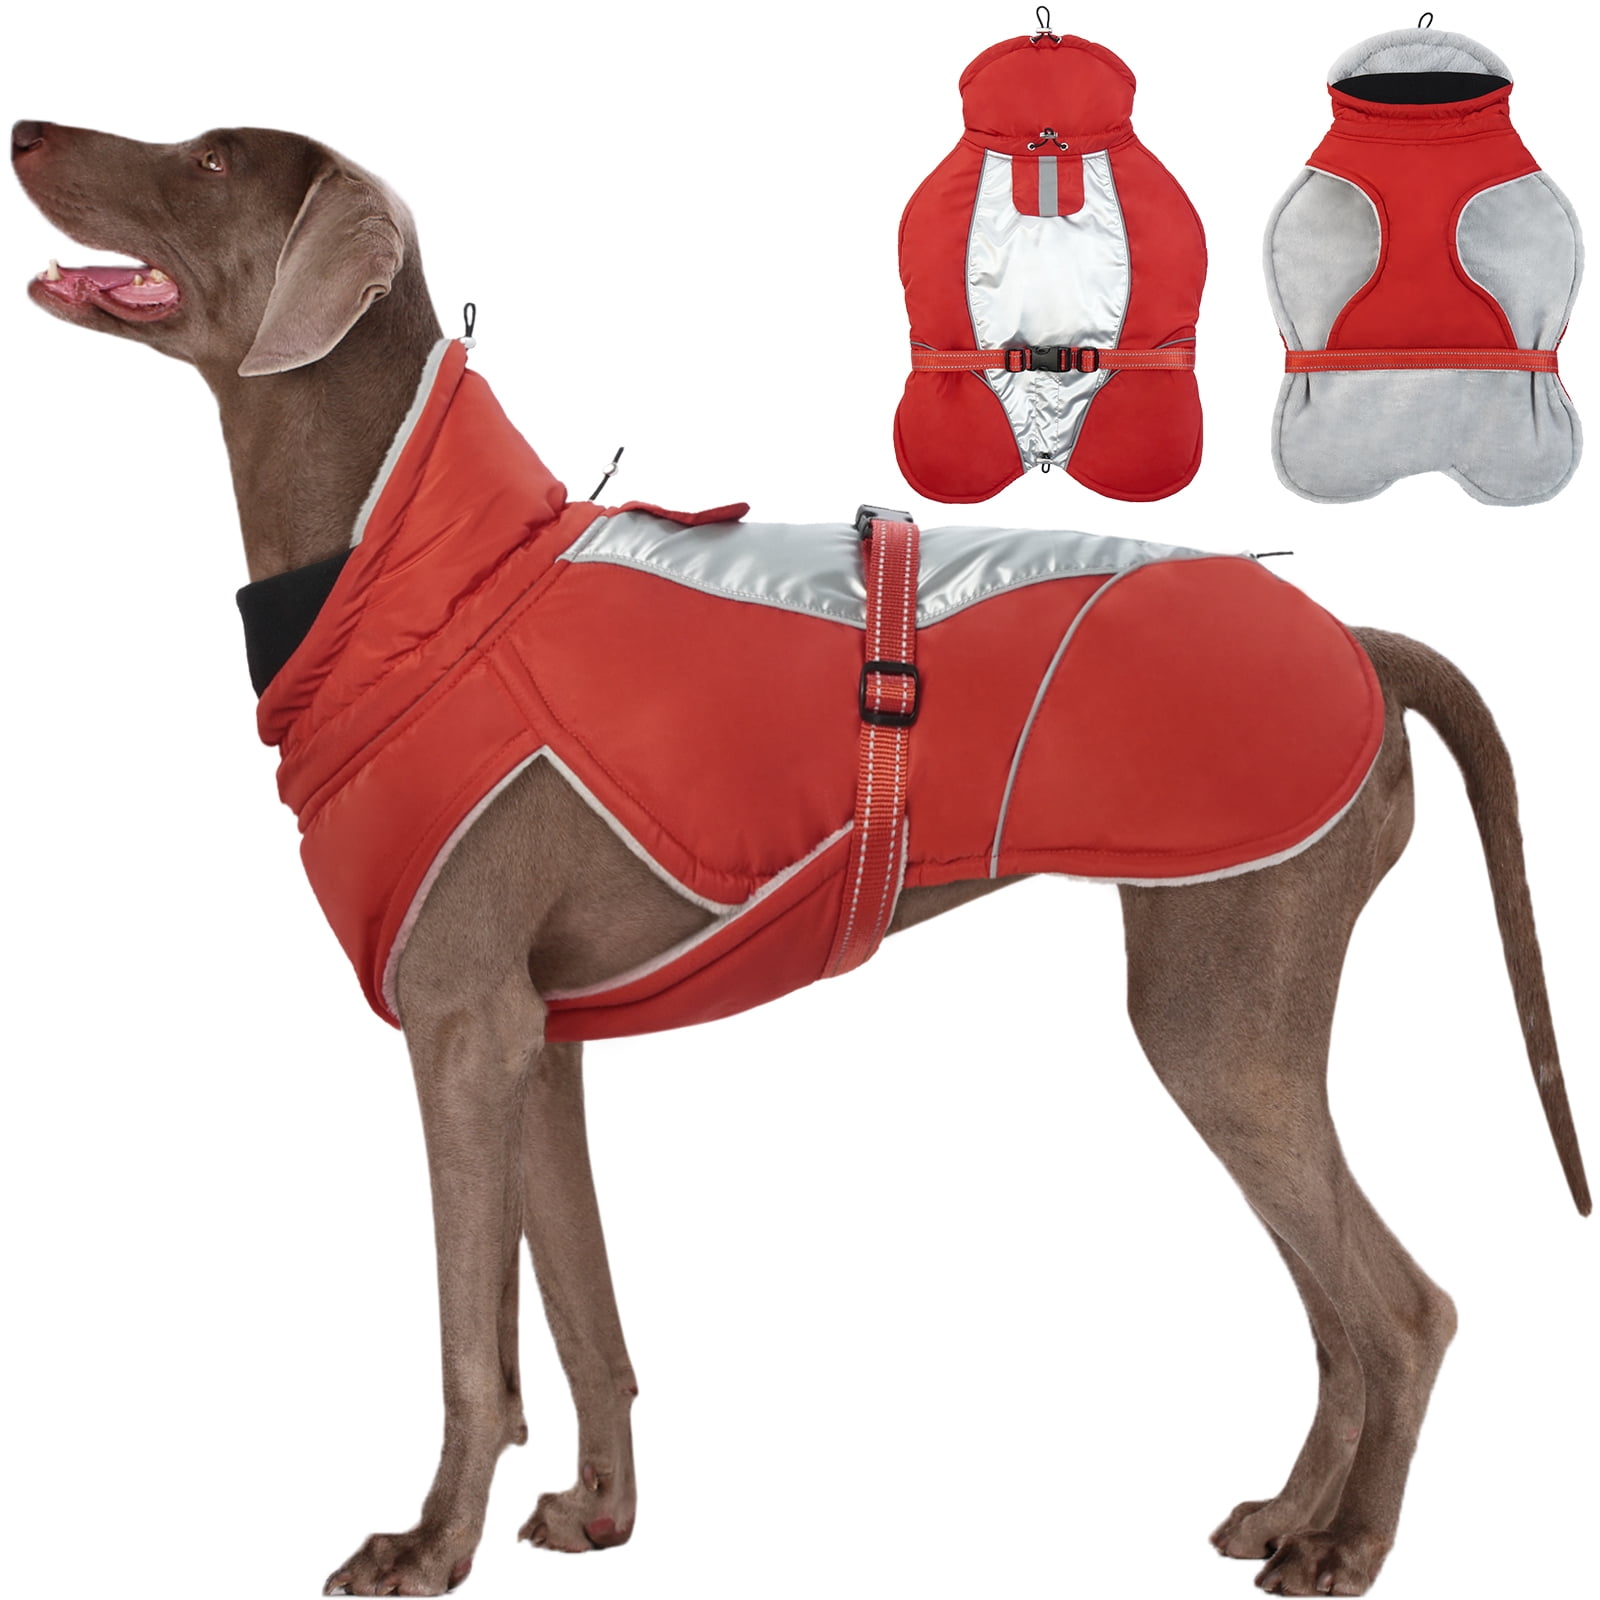 Kuoser Warm Dog Coat Reflective Dog Winter Jacket with High Collar, Red ...